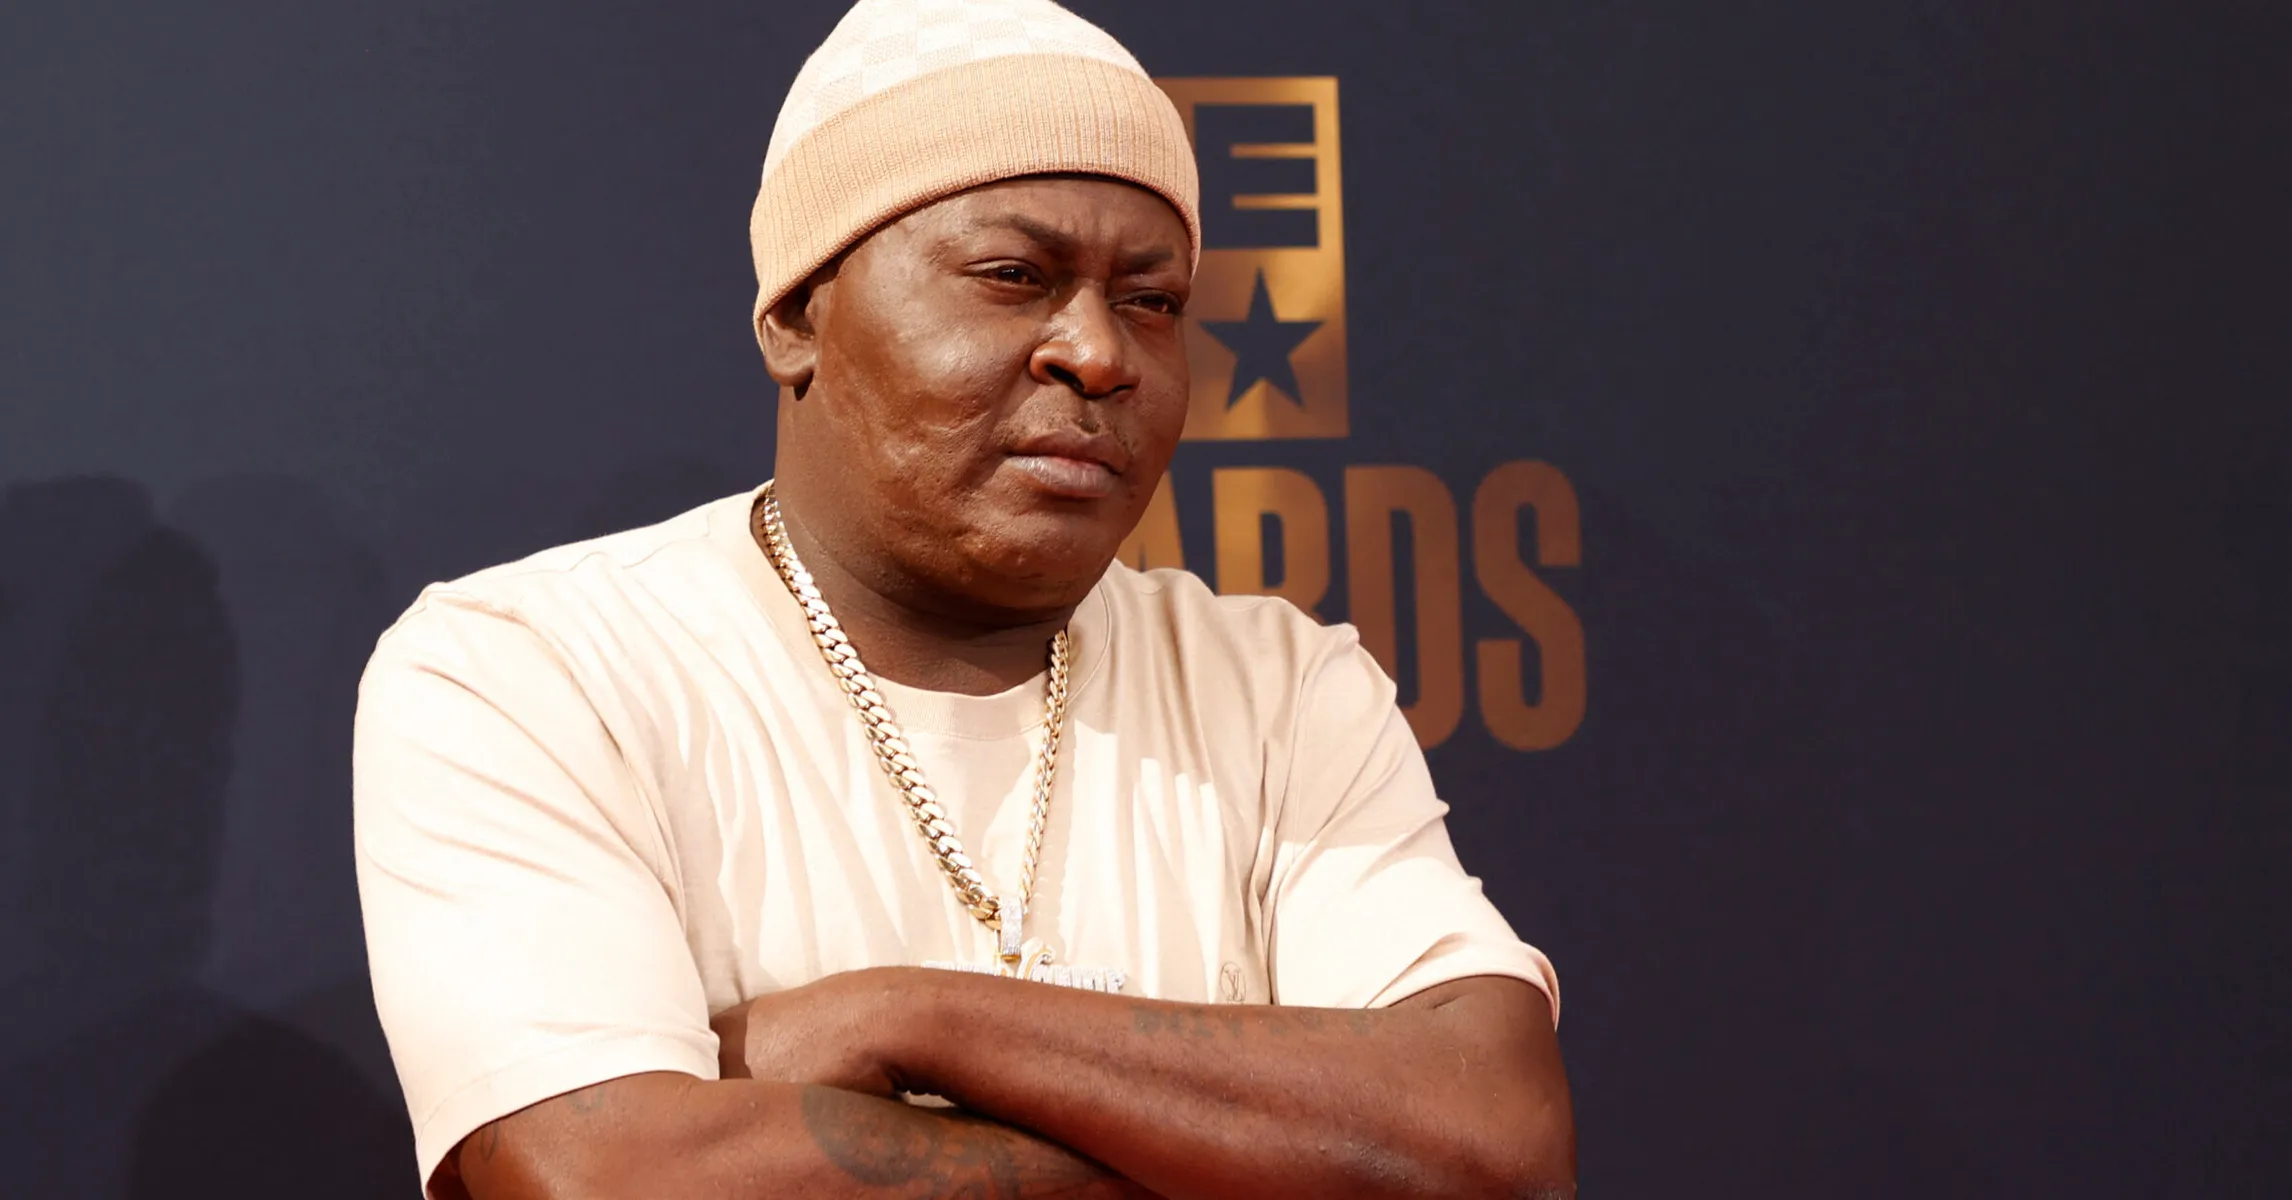 Trick Daddy reportedly blocked a woman from “Love & Hip-Hop” after she rejected his sexual advances